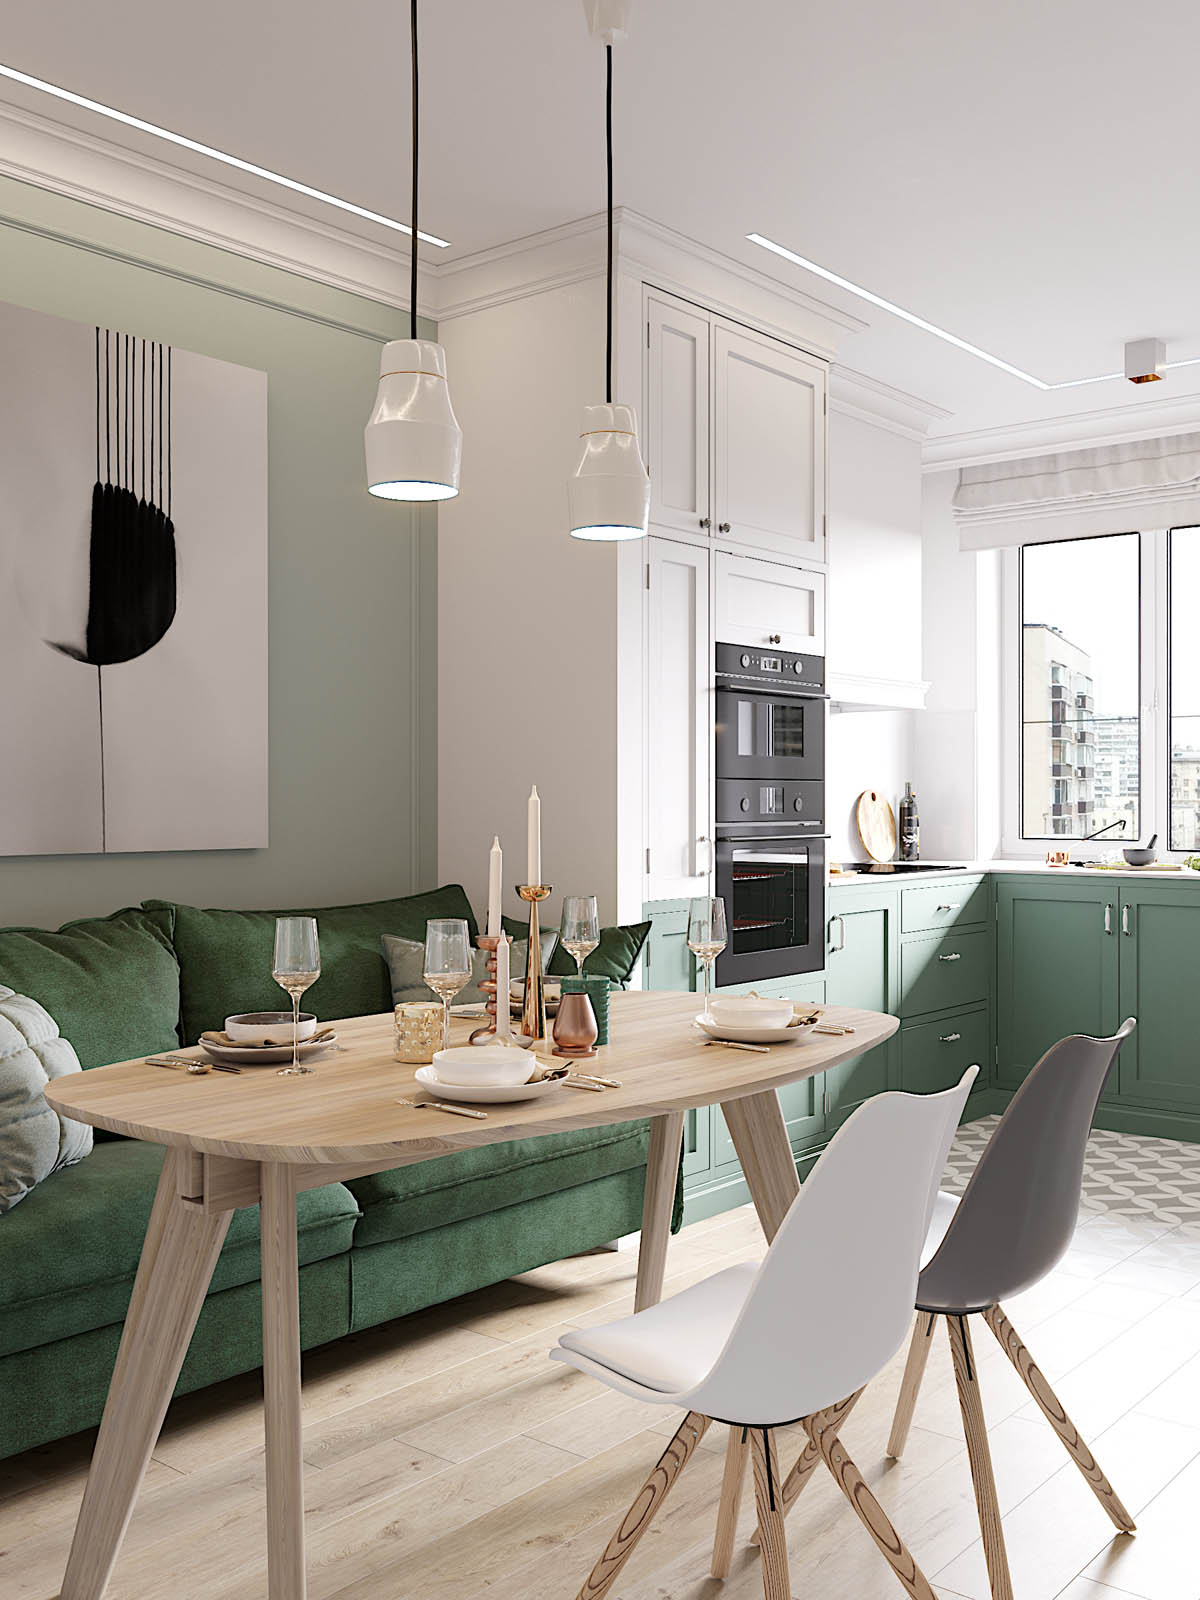 Sophisticated Scandinavian Style Home With Green Decor :: Cool Chic Style Fashion